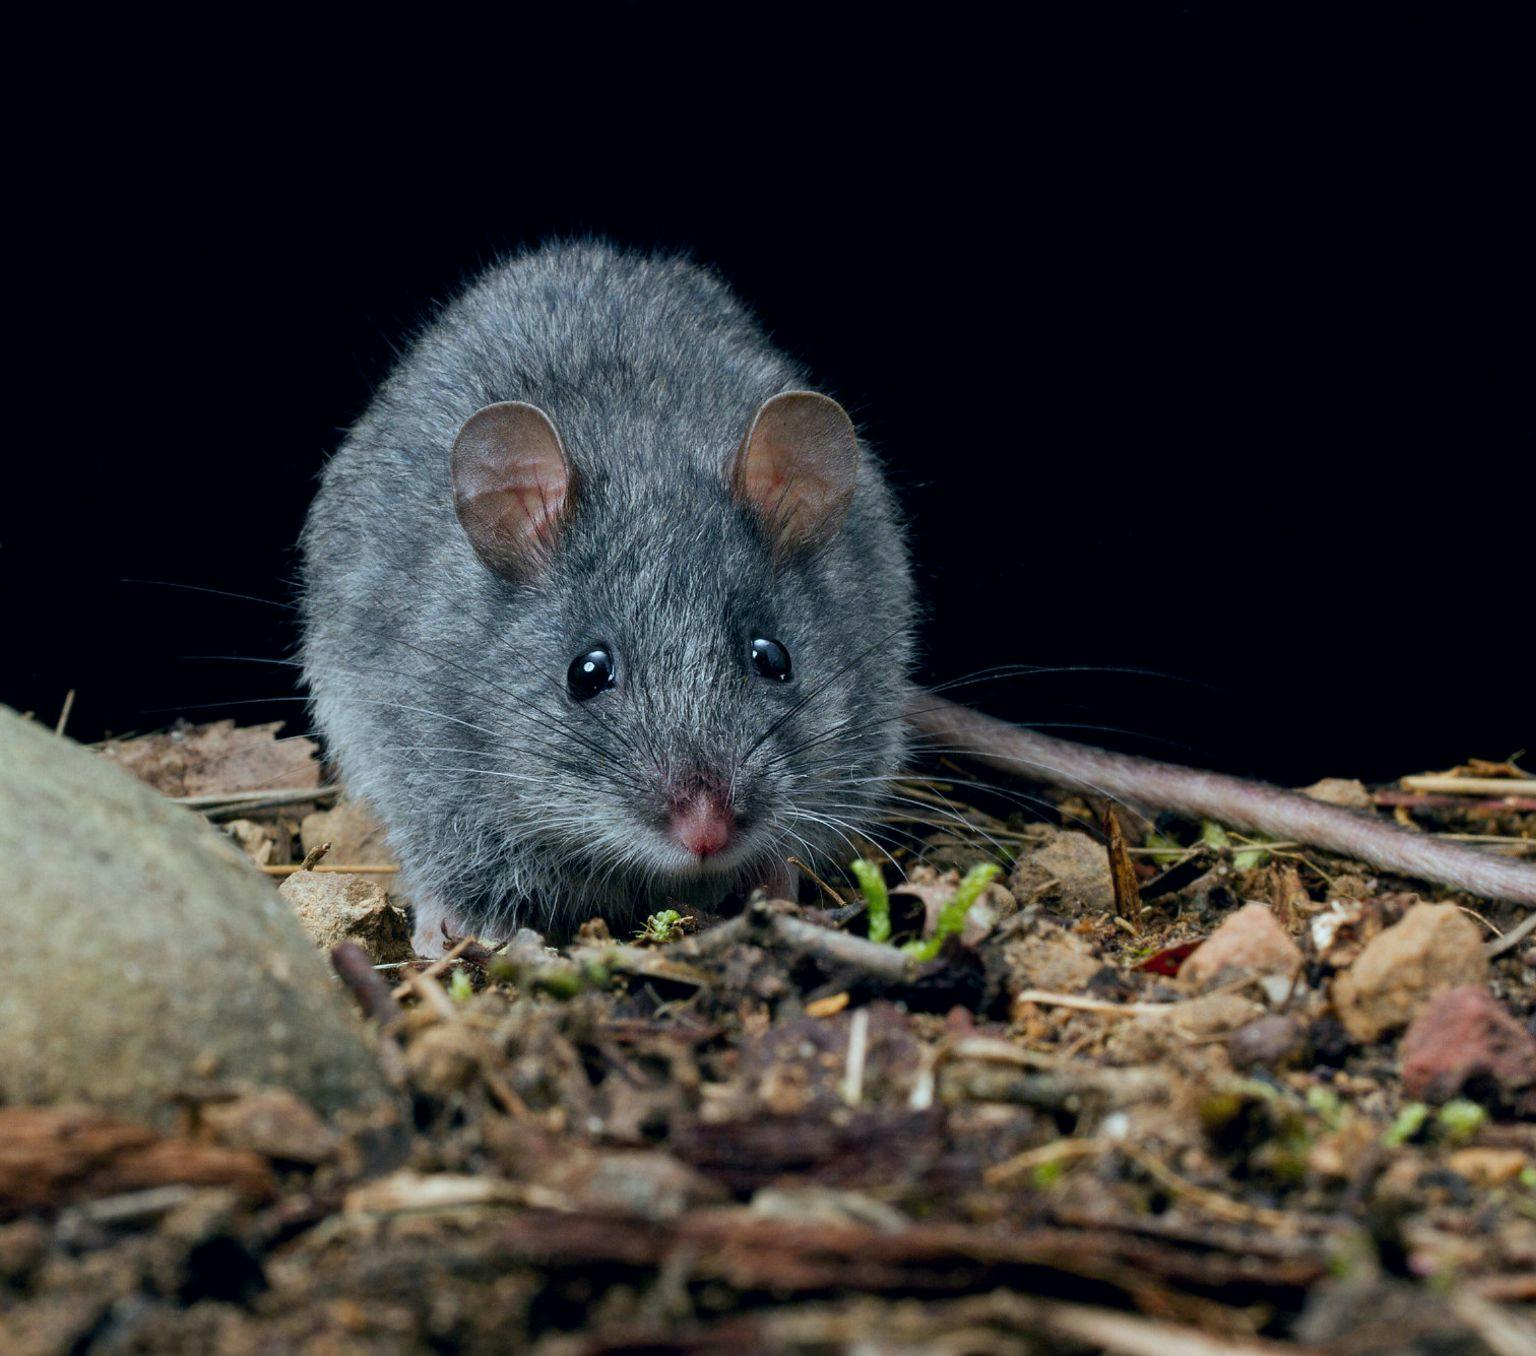 Small native rodent on soil with a black background